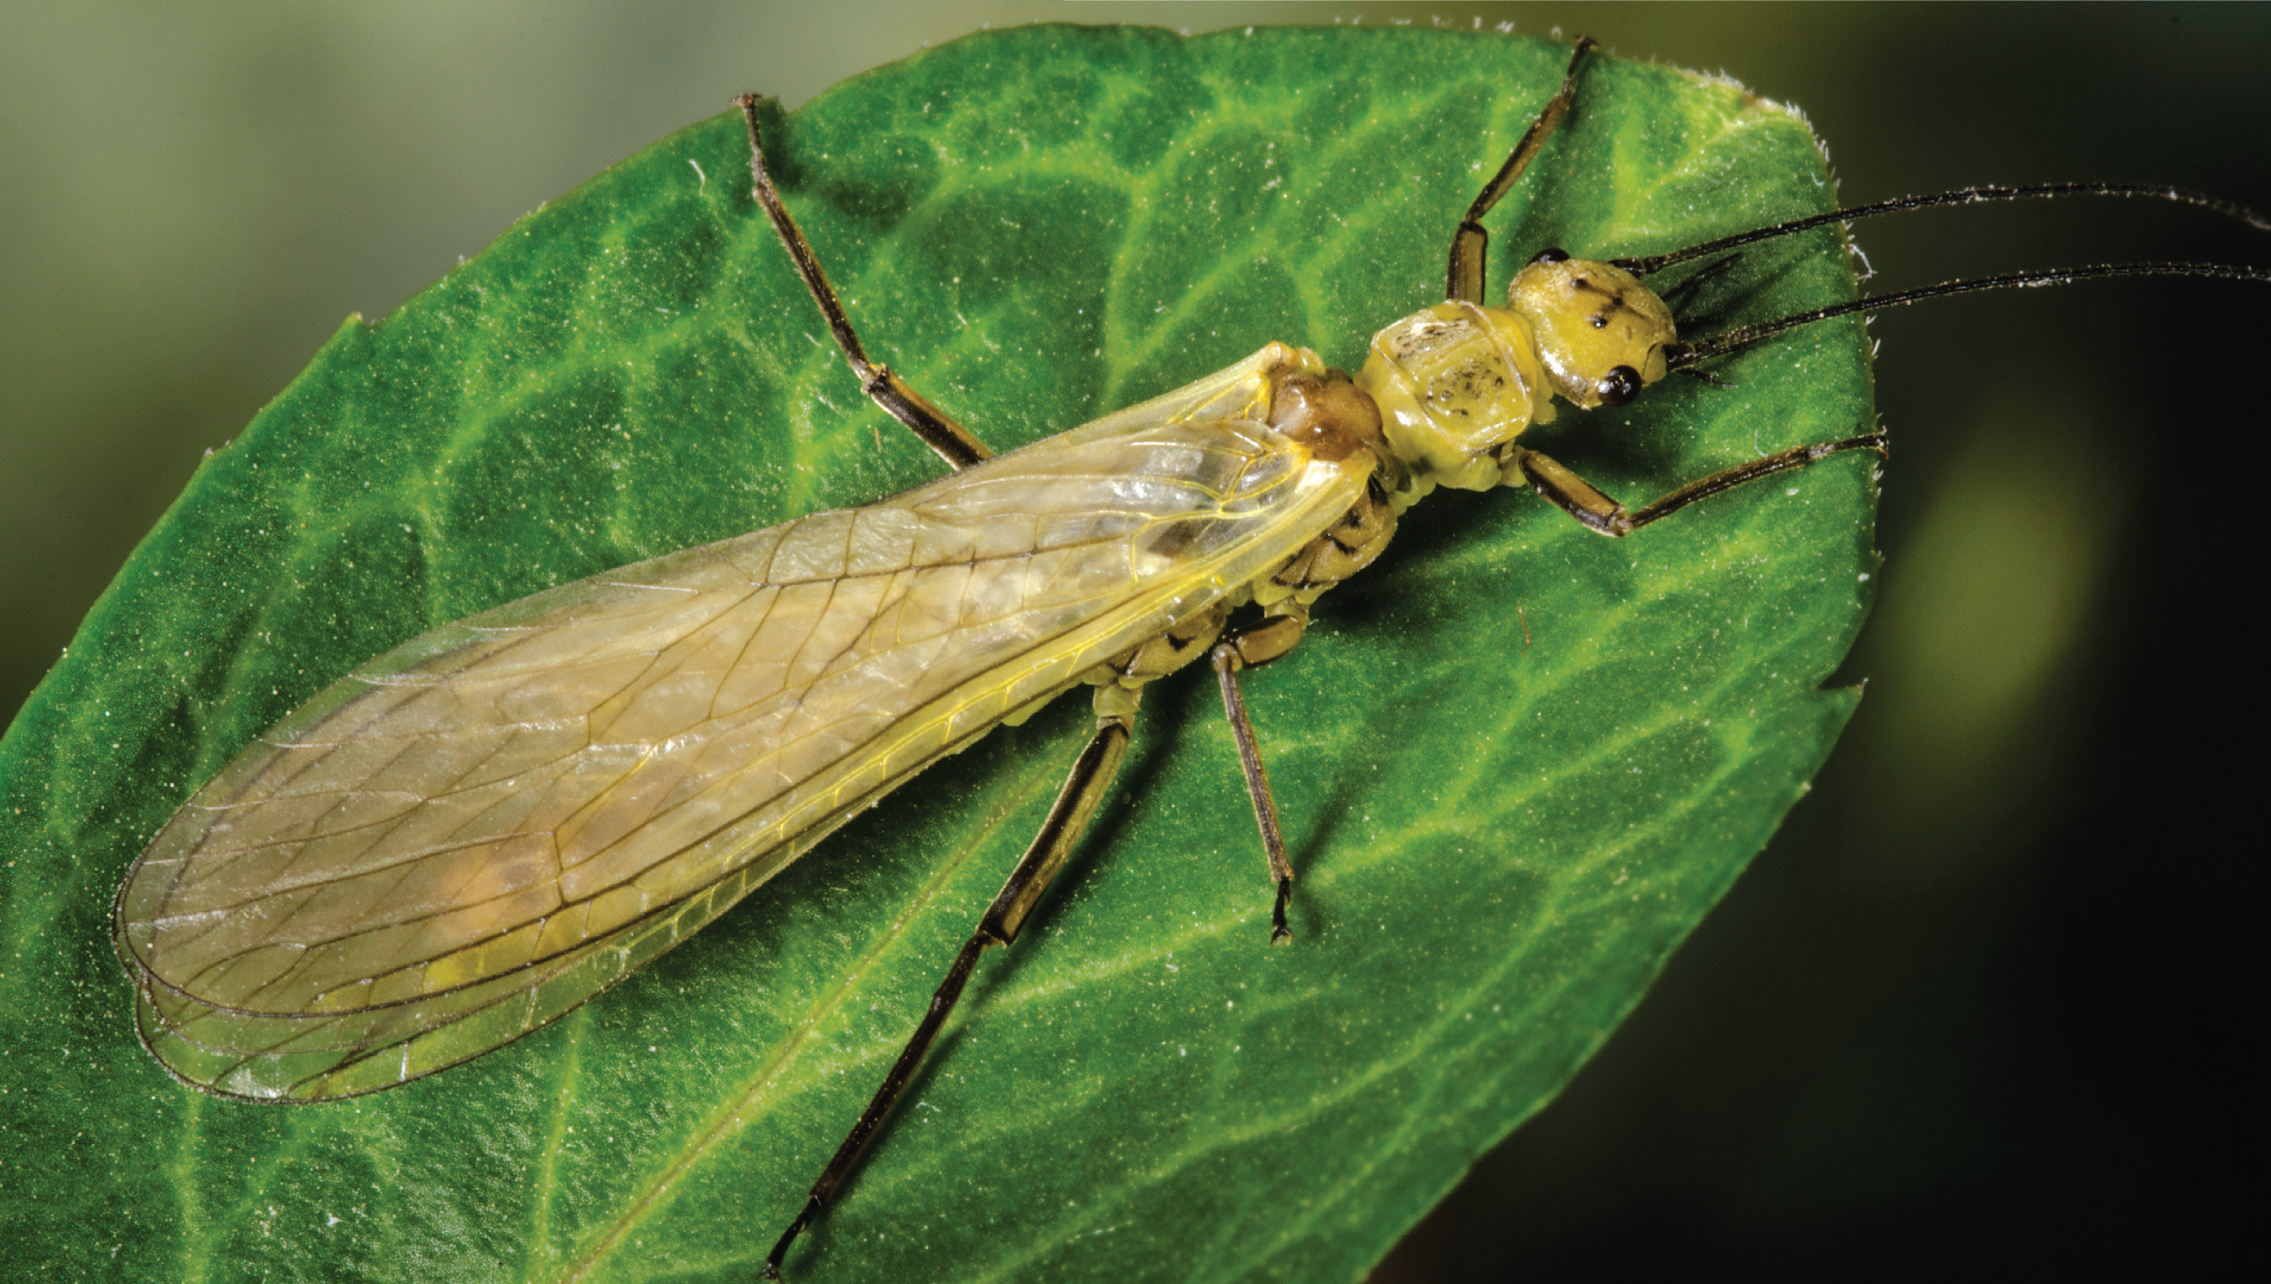 The bodies of yellow sally females can reach up to 14 millimeters long; the males are a little shorter. These insects have two tails and two long antennae. When not in flight, their wings fold over the tops of their abdomens.